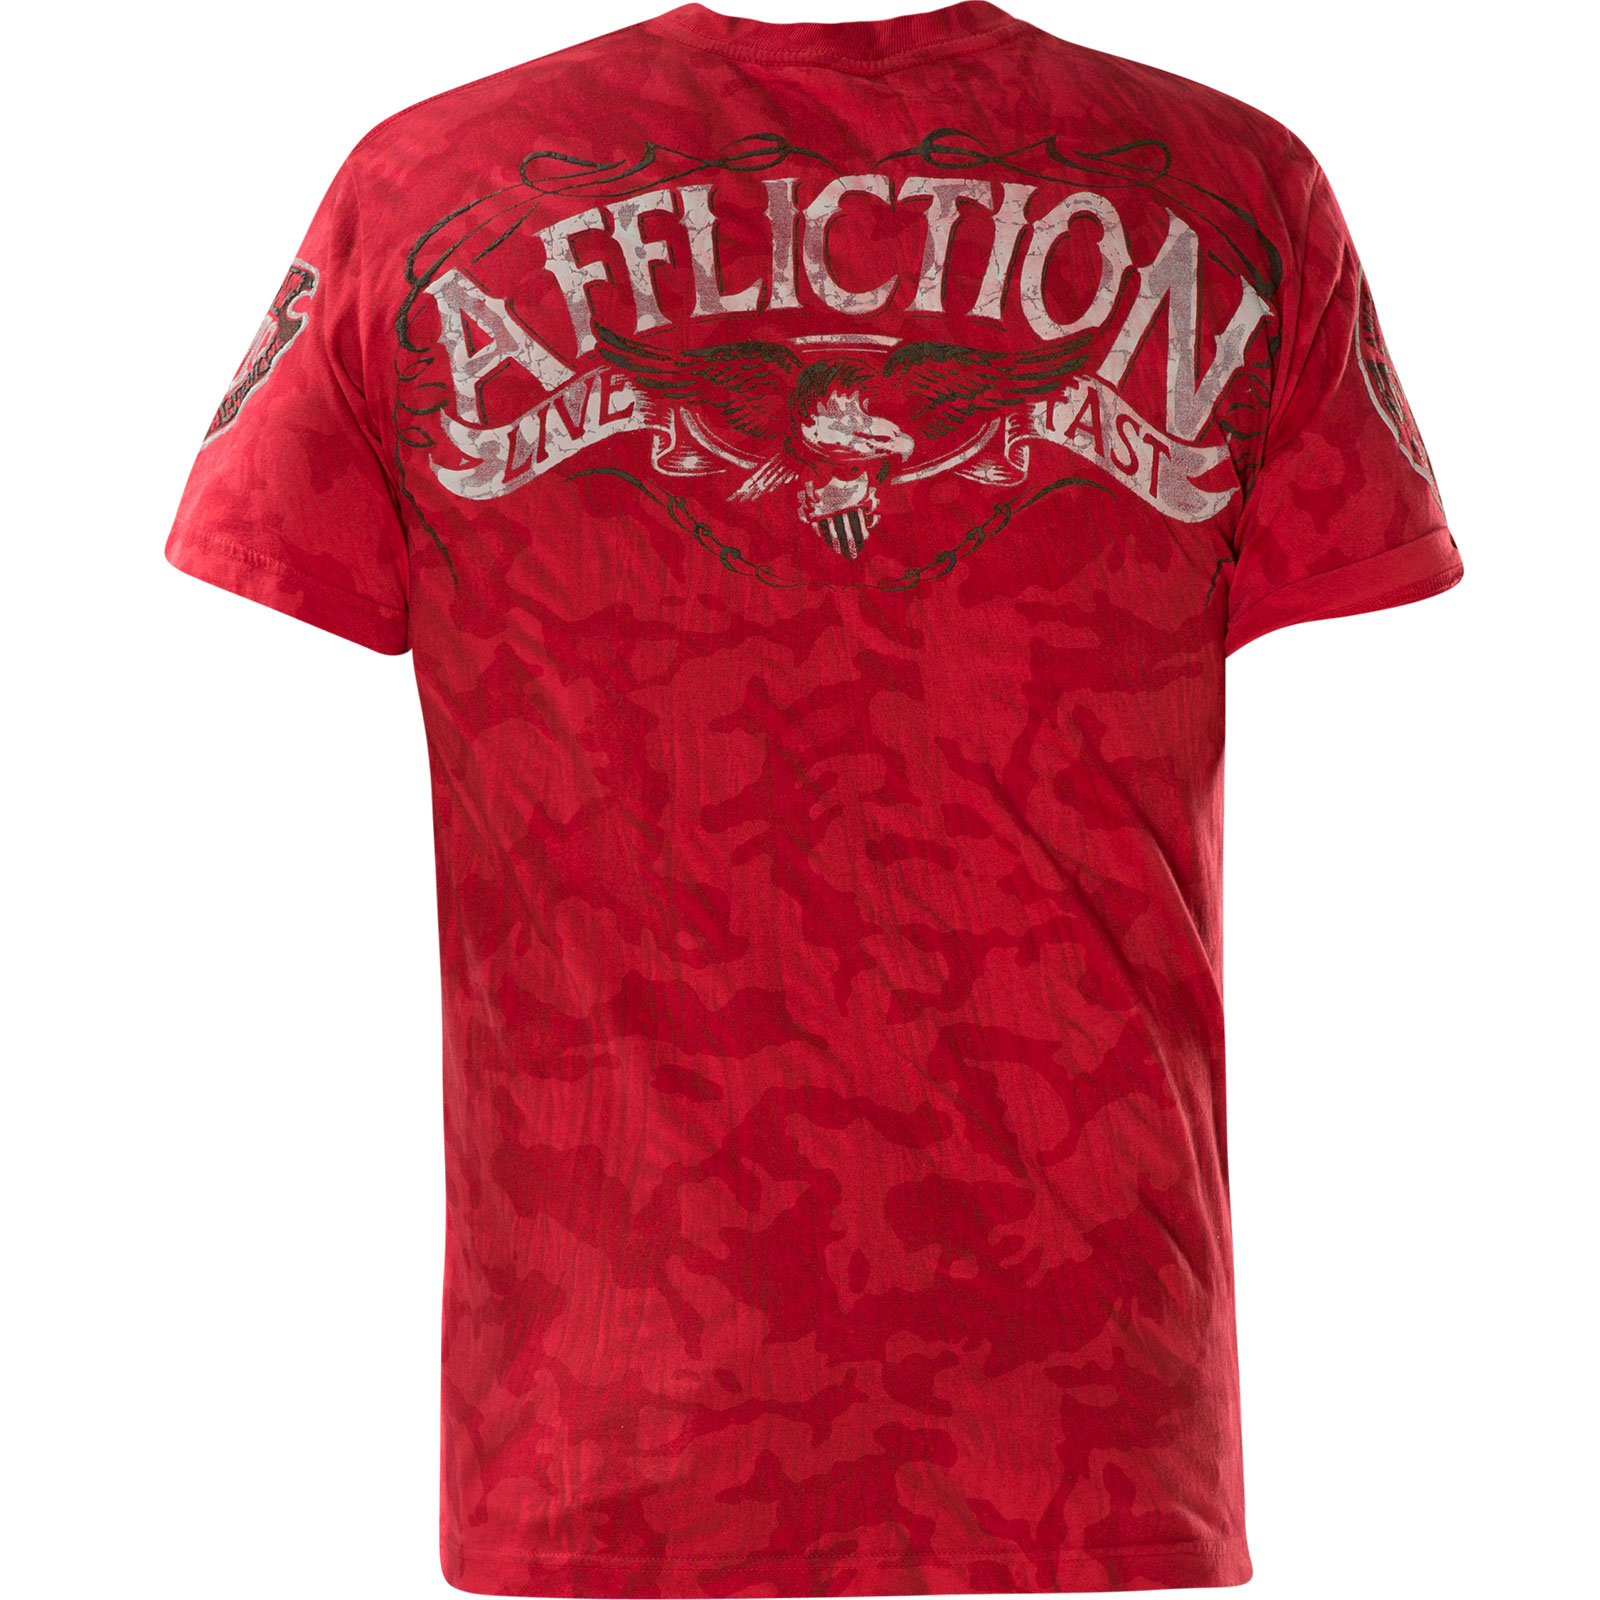 Affliction Prohibition T-Shirt Print featuring a heraldric animal